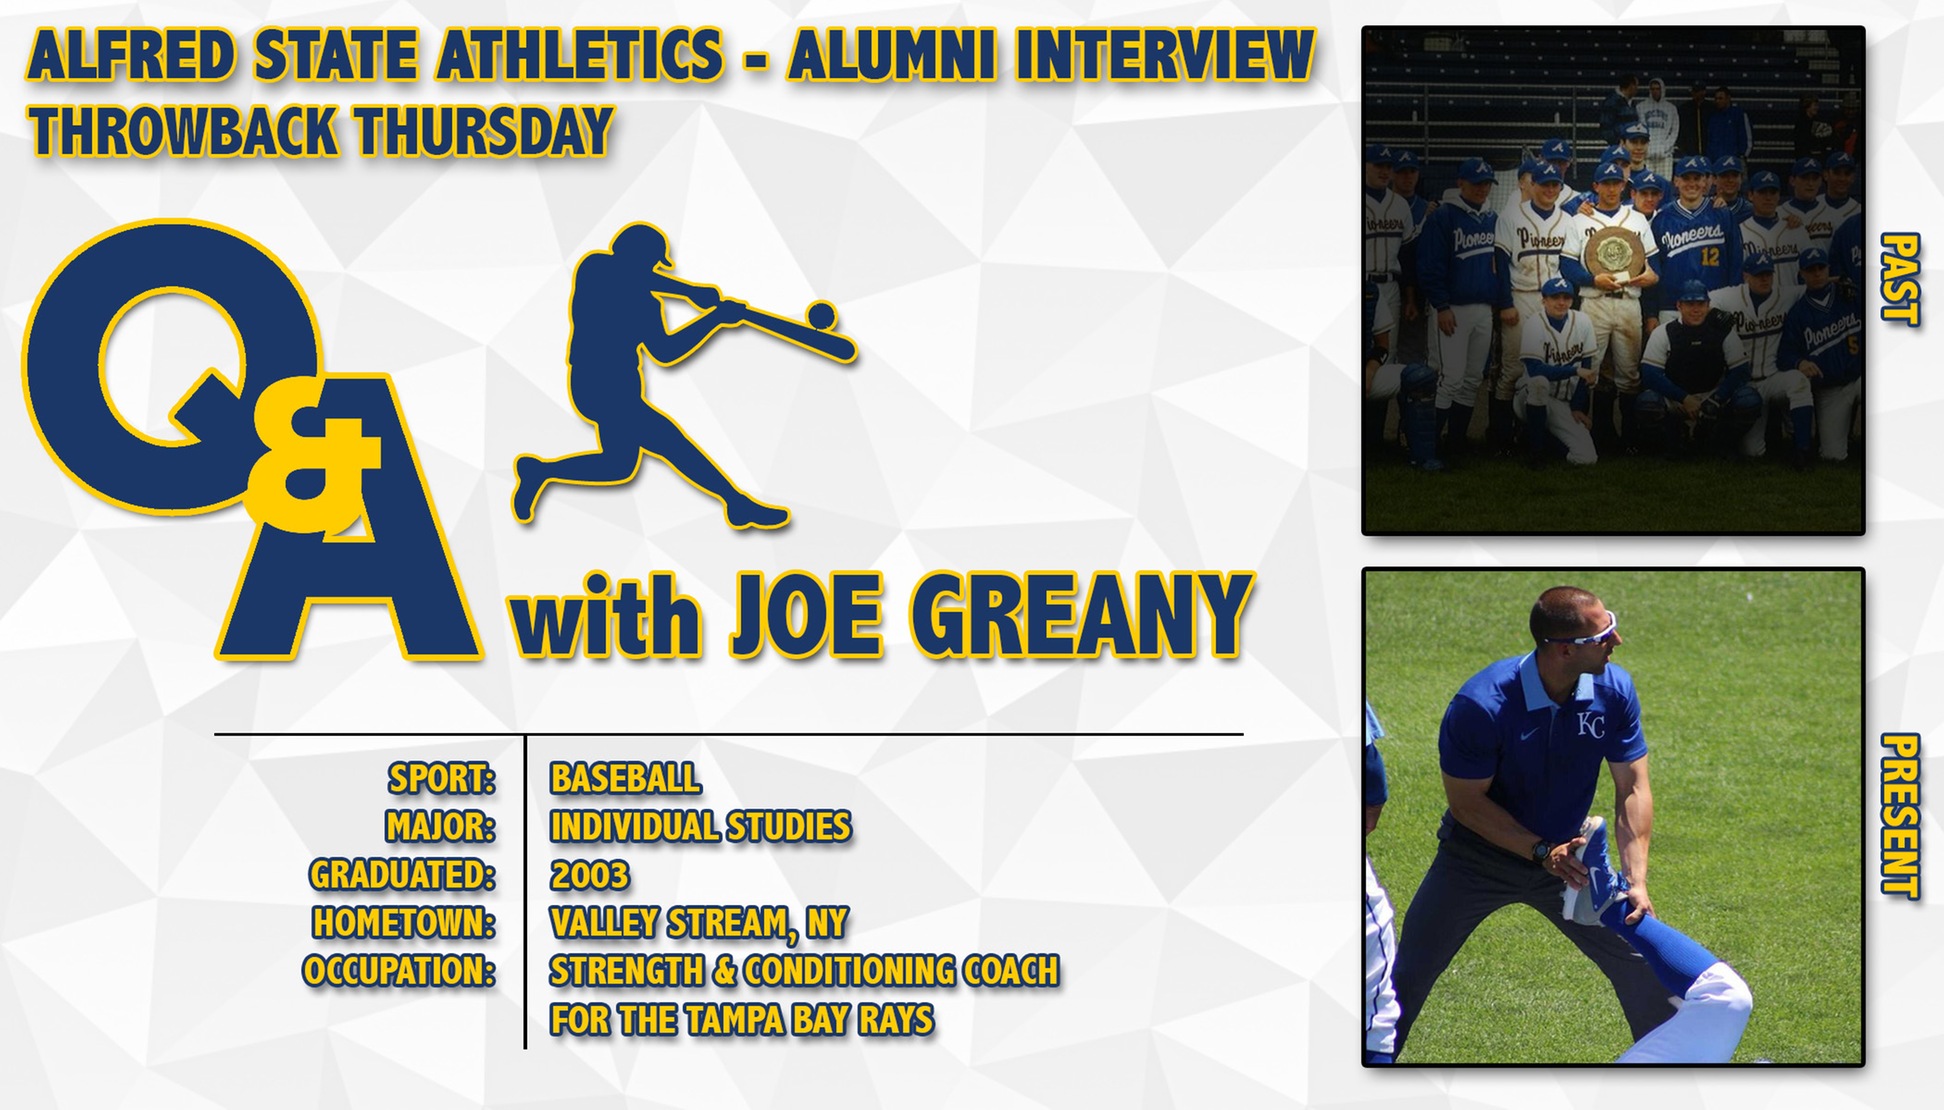 Q&A with Joe Greany